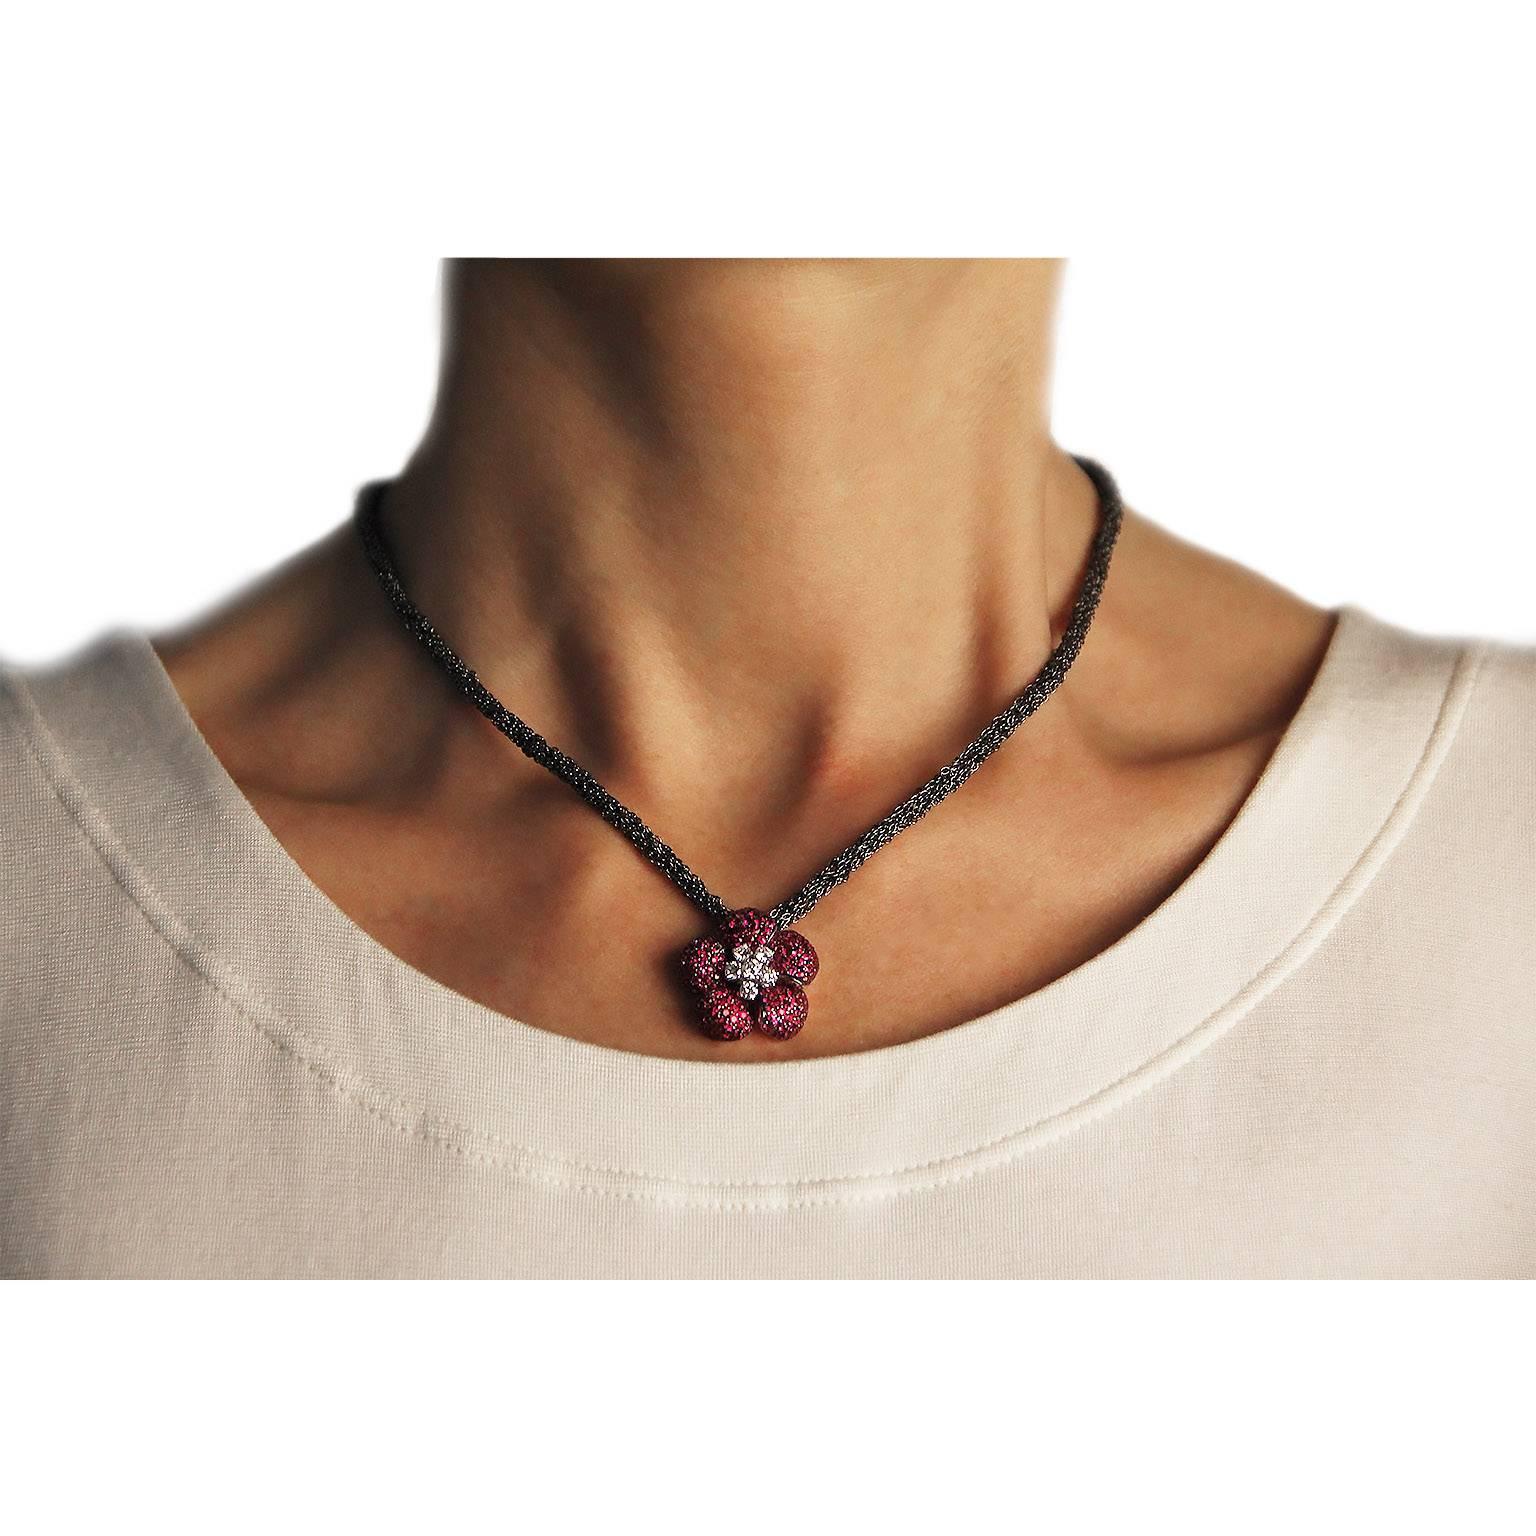 Jona design collection, hand crafted in Italy, 18 karat white gold flower pendant set with 211 rubies weighing 3.56 carats and 6 diamonds weighing 0.61 carats in total, G color, VVS2 clarity, on a woven burnished sterling silver chain necklace, 17.7